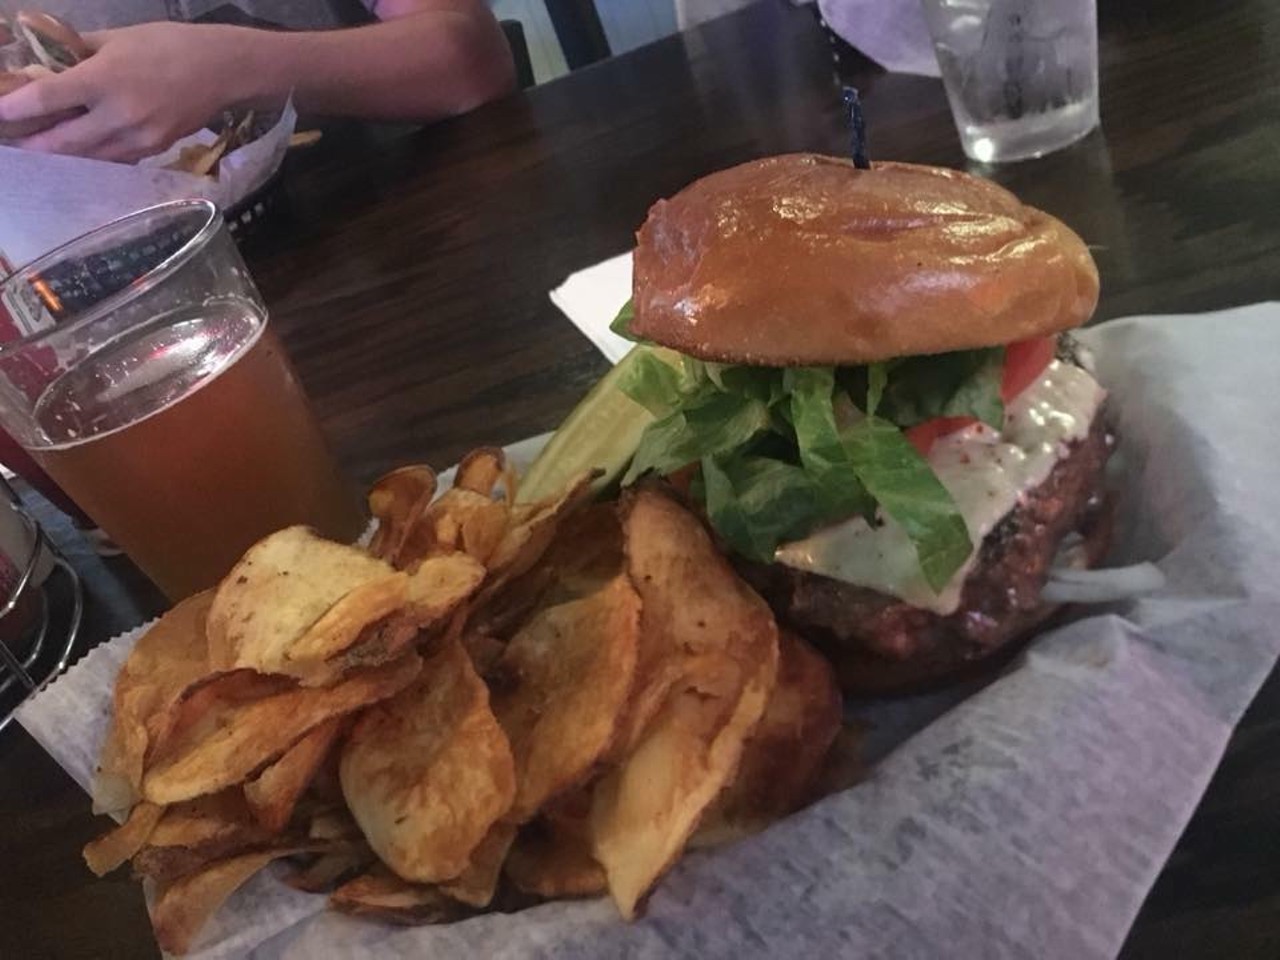  49th Street Tavern 
4129 East 49th St., Cuyahoga Falls 
The 49th Street Tavern is offering the 49th Street Burger that comes with lettuce, tomato, onions, and choice of cheese on a brioche bun with a side of house chips and a pickle spear.
Photo Provided by Restaurant